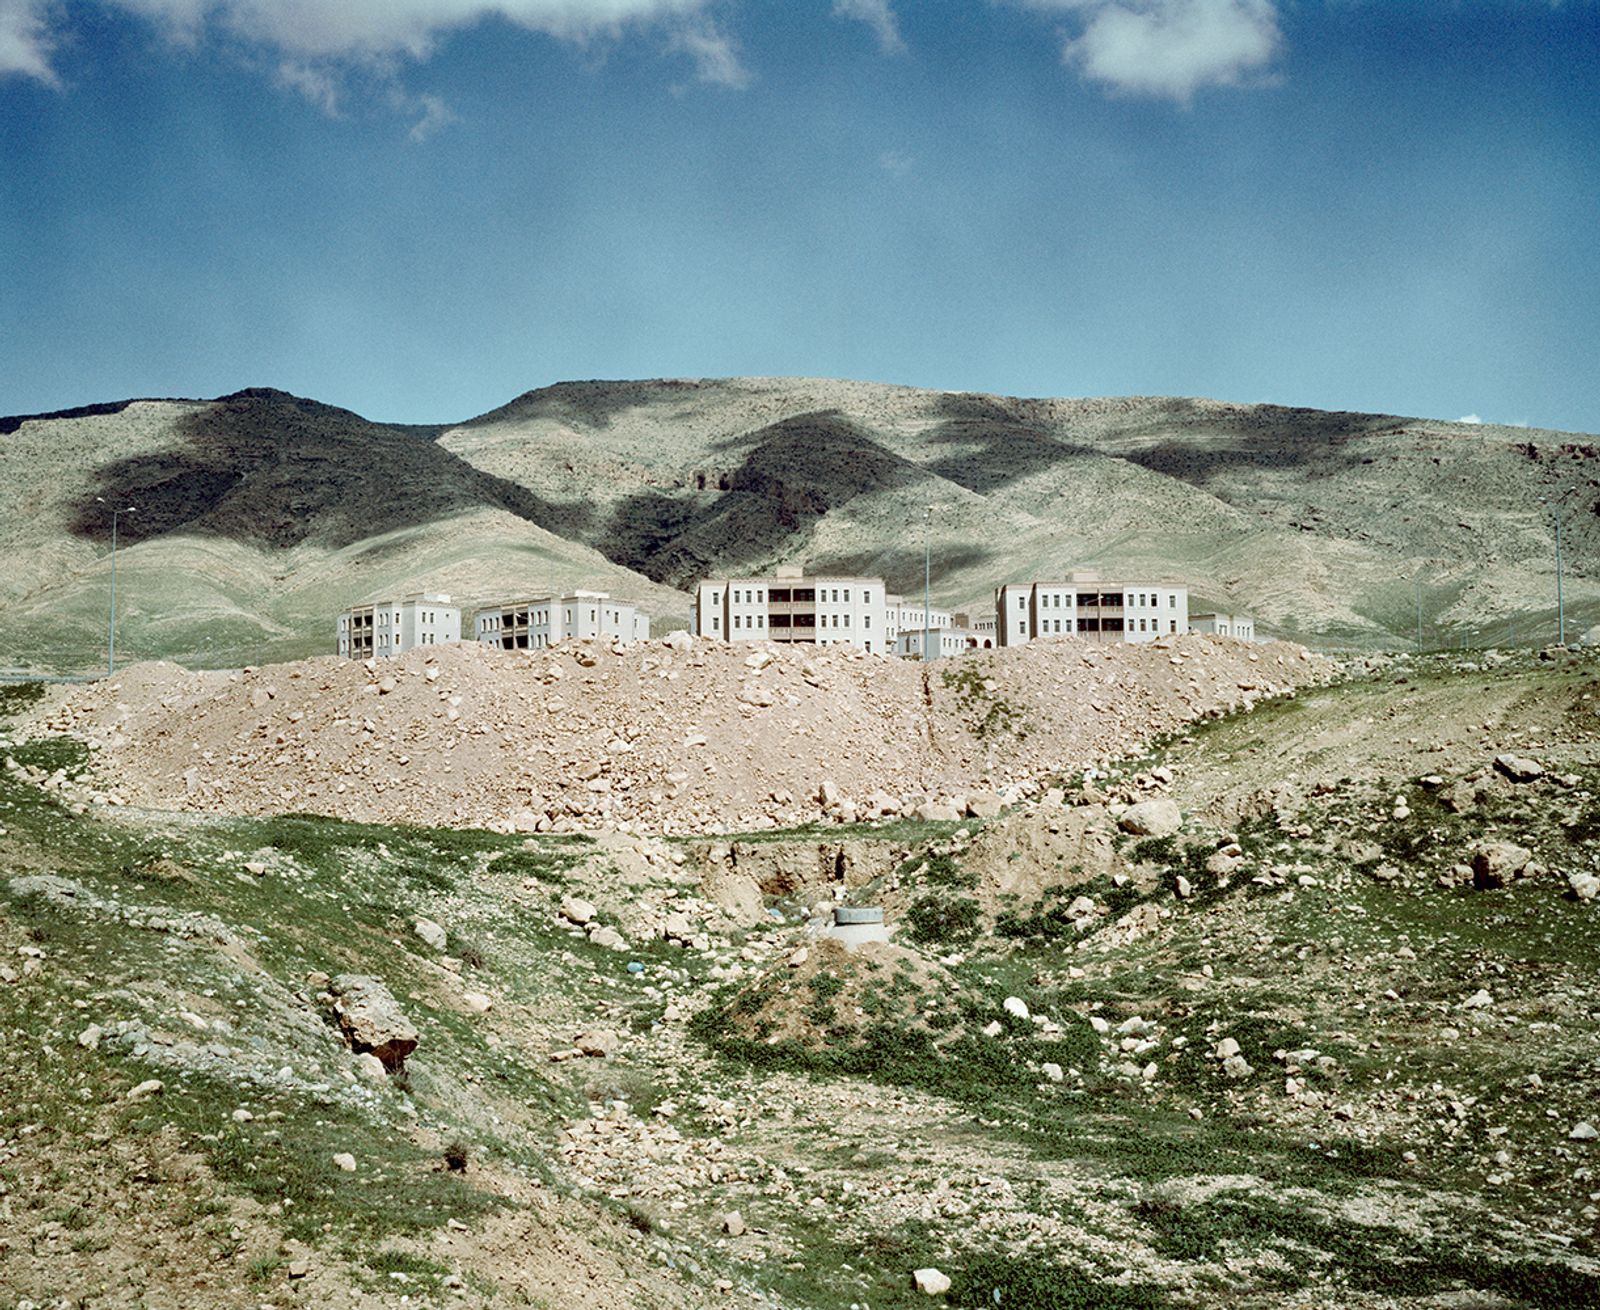 © Mathias Depardon - Image from the GOLD RIVERS photography project